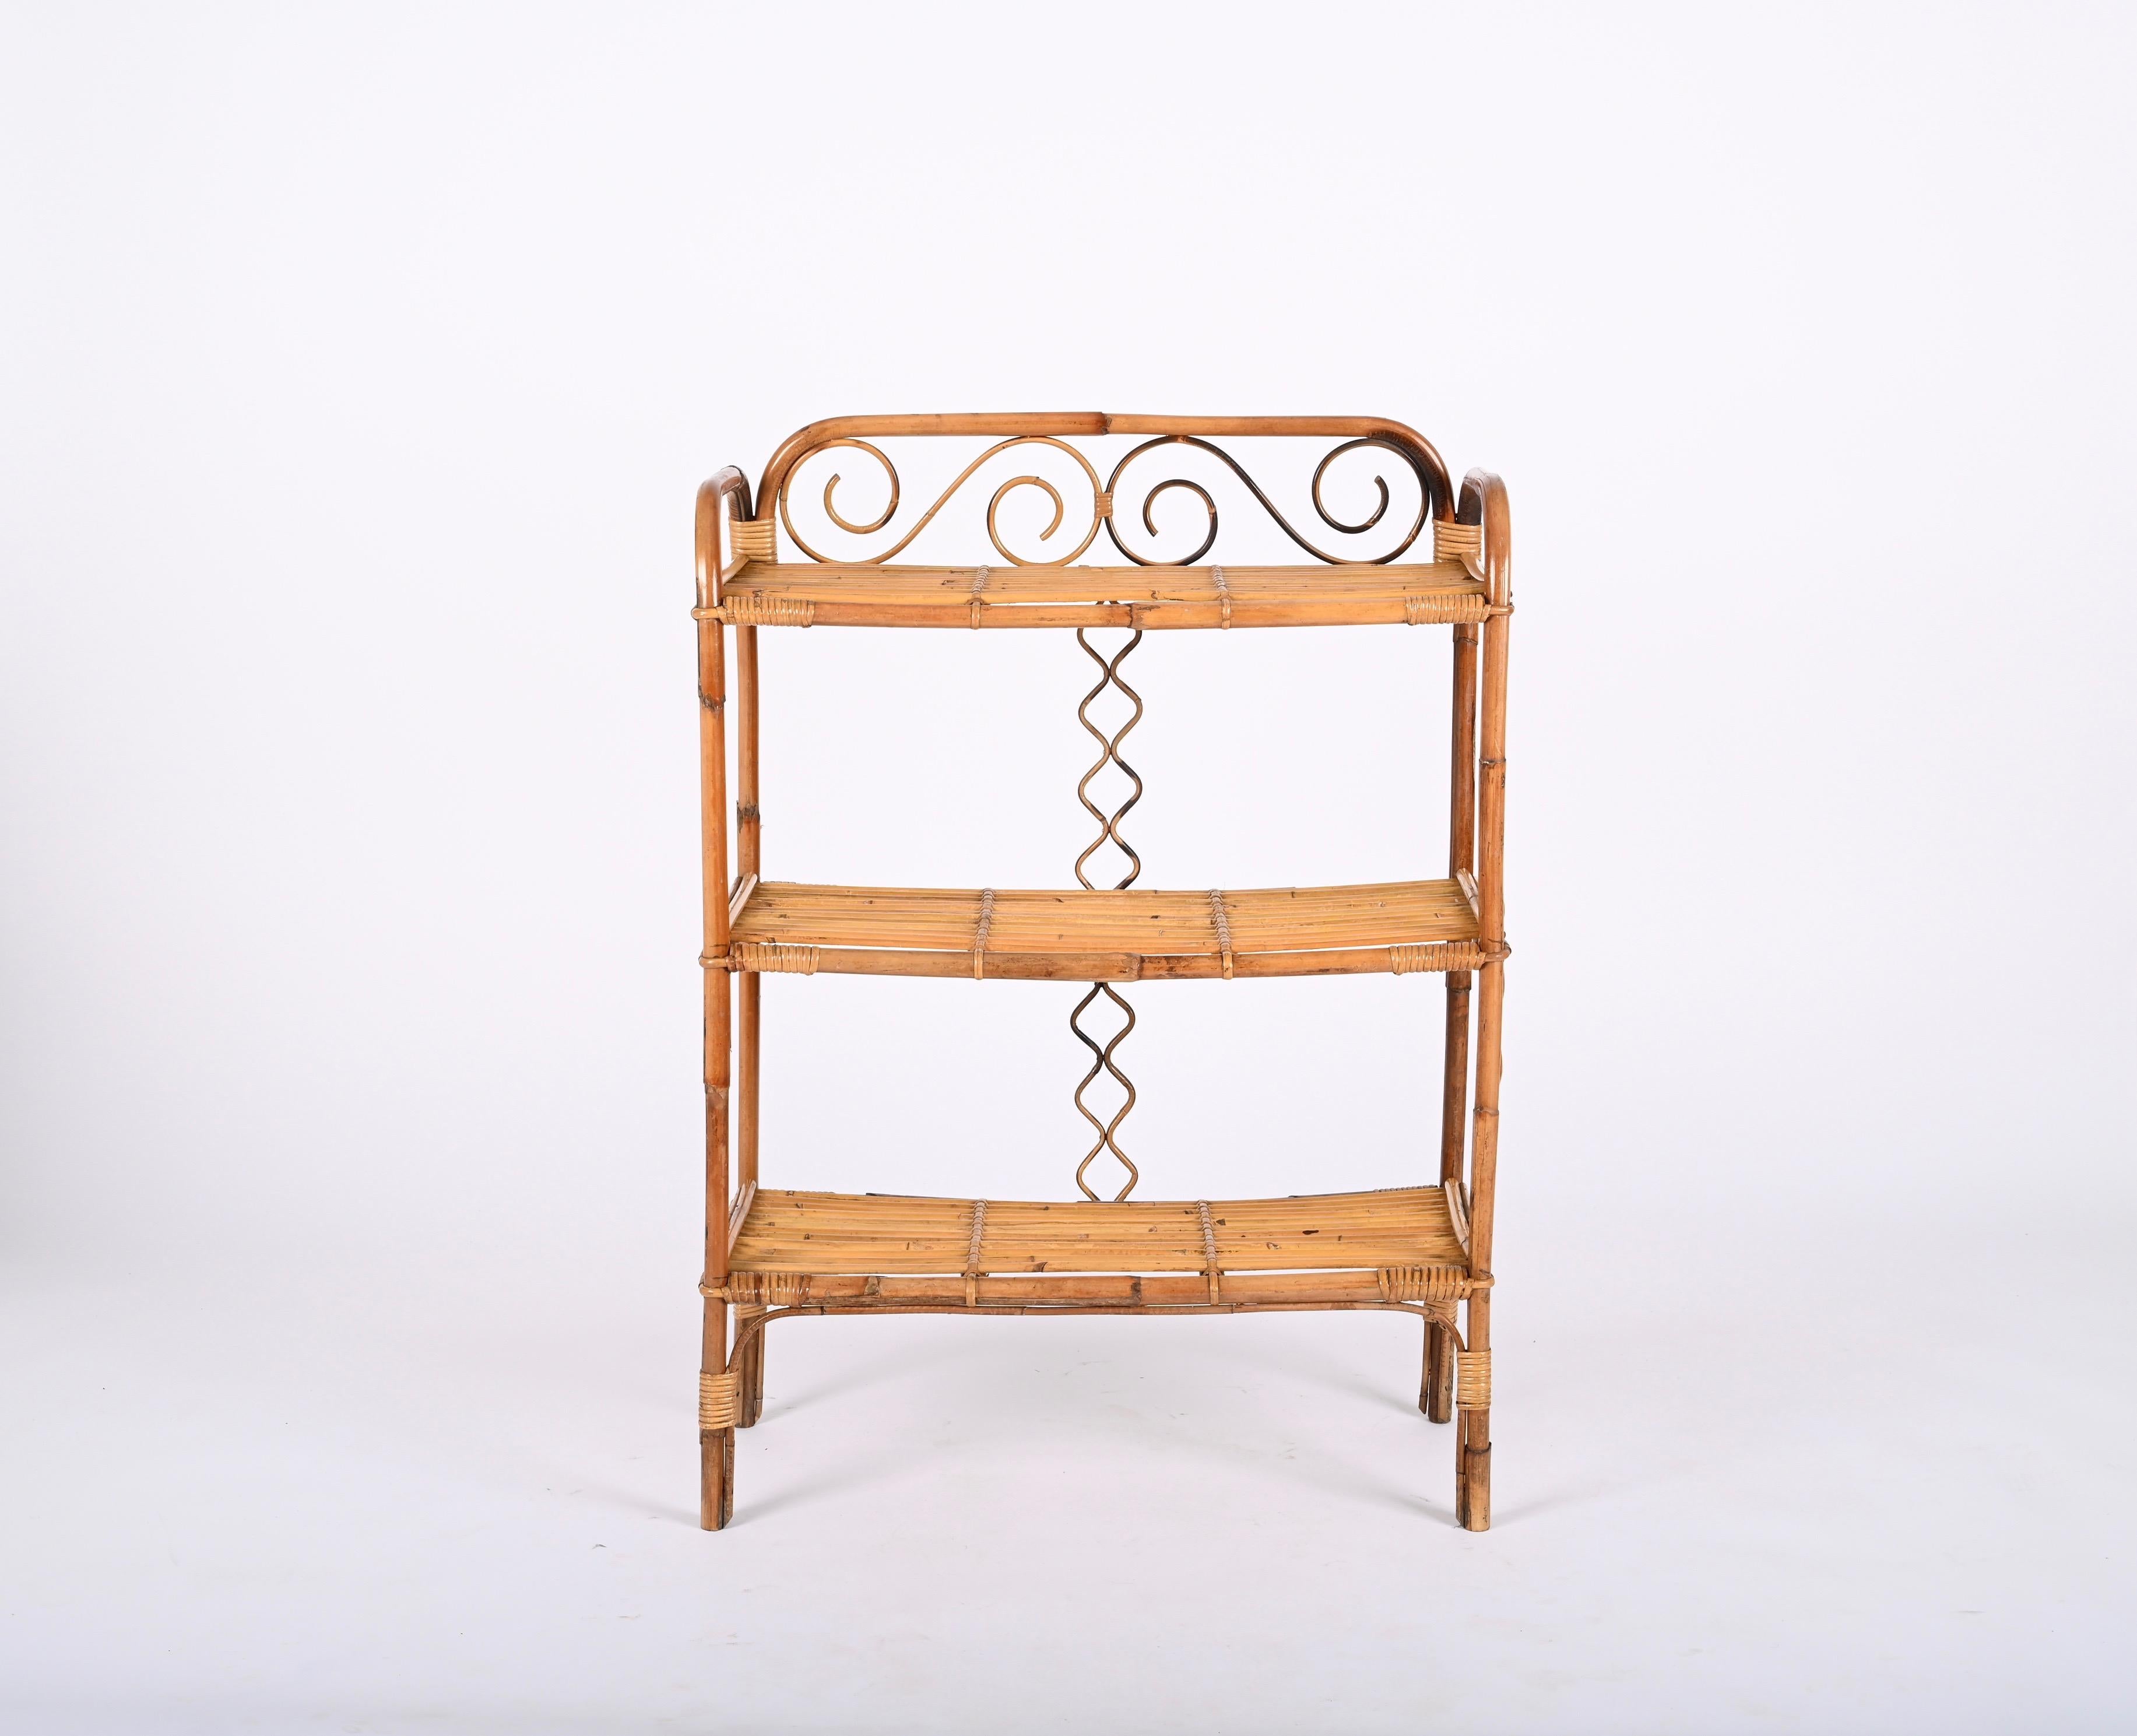 Midcentury Étagère Bamboo and Rattan, Italian Bookcase with Three Shelves, 1970s For Sale 3